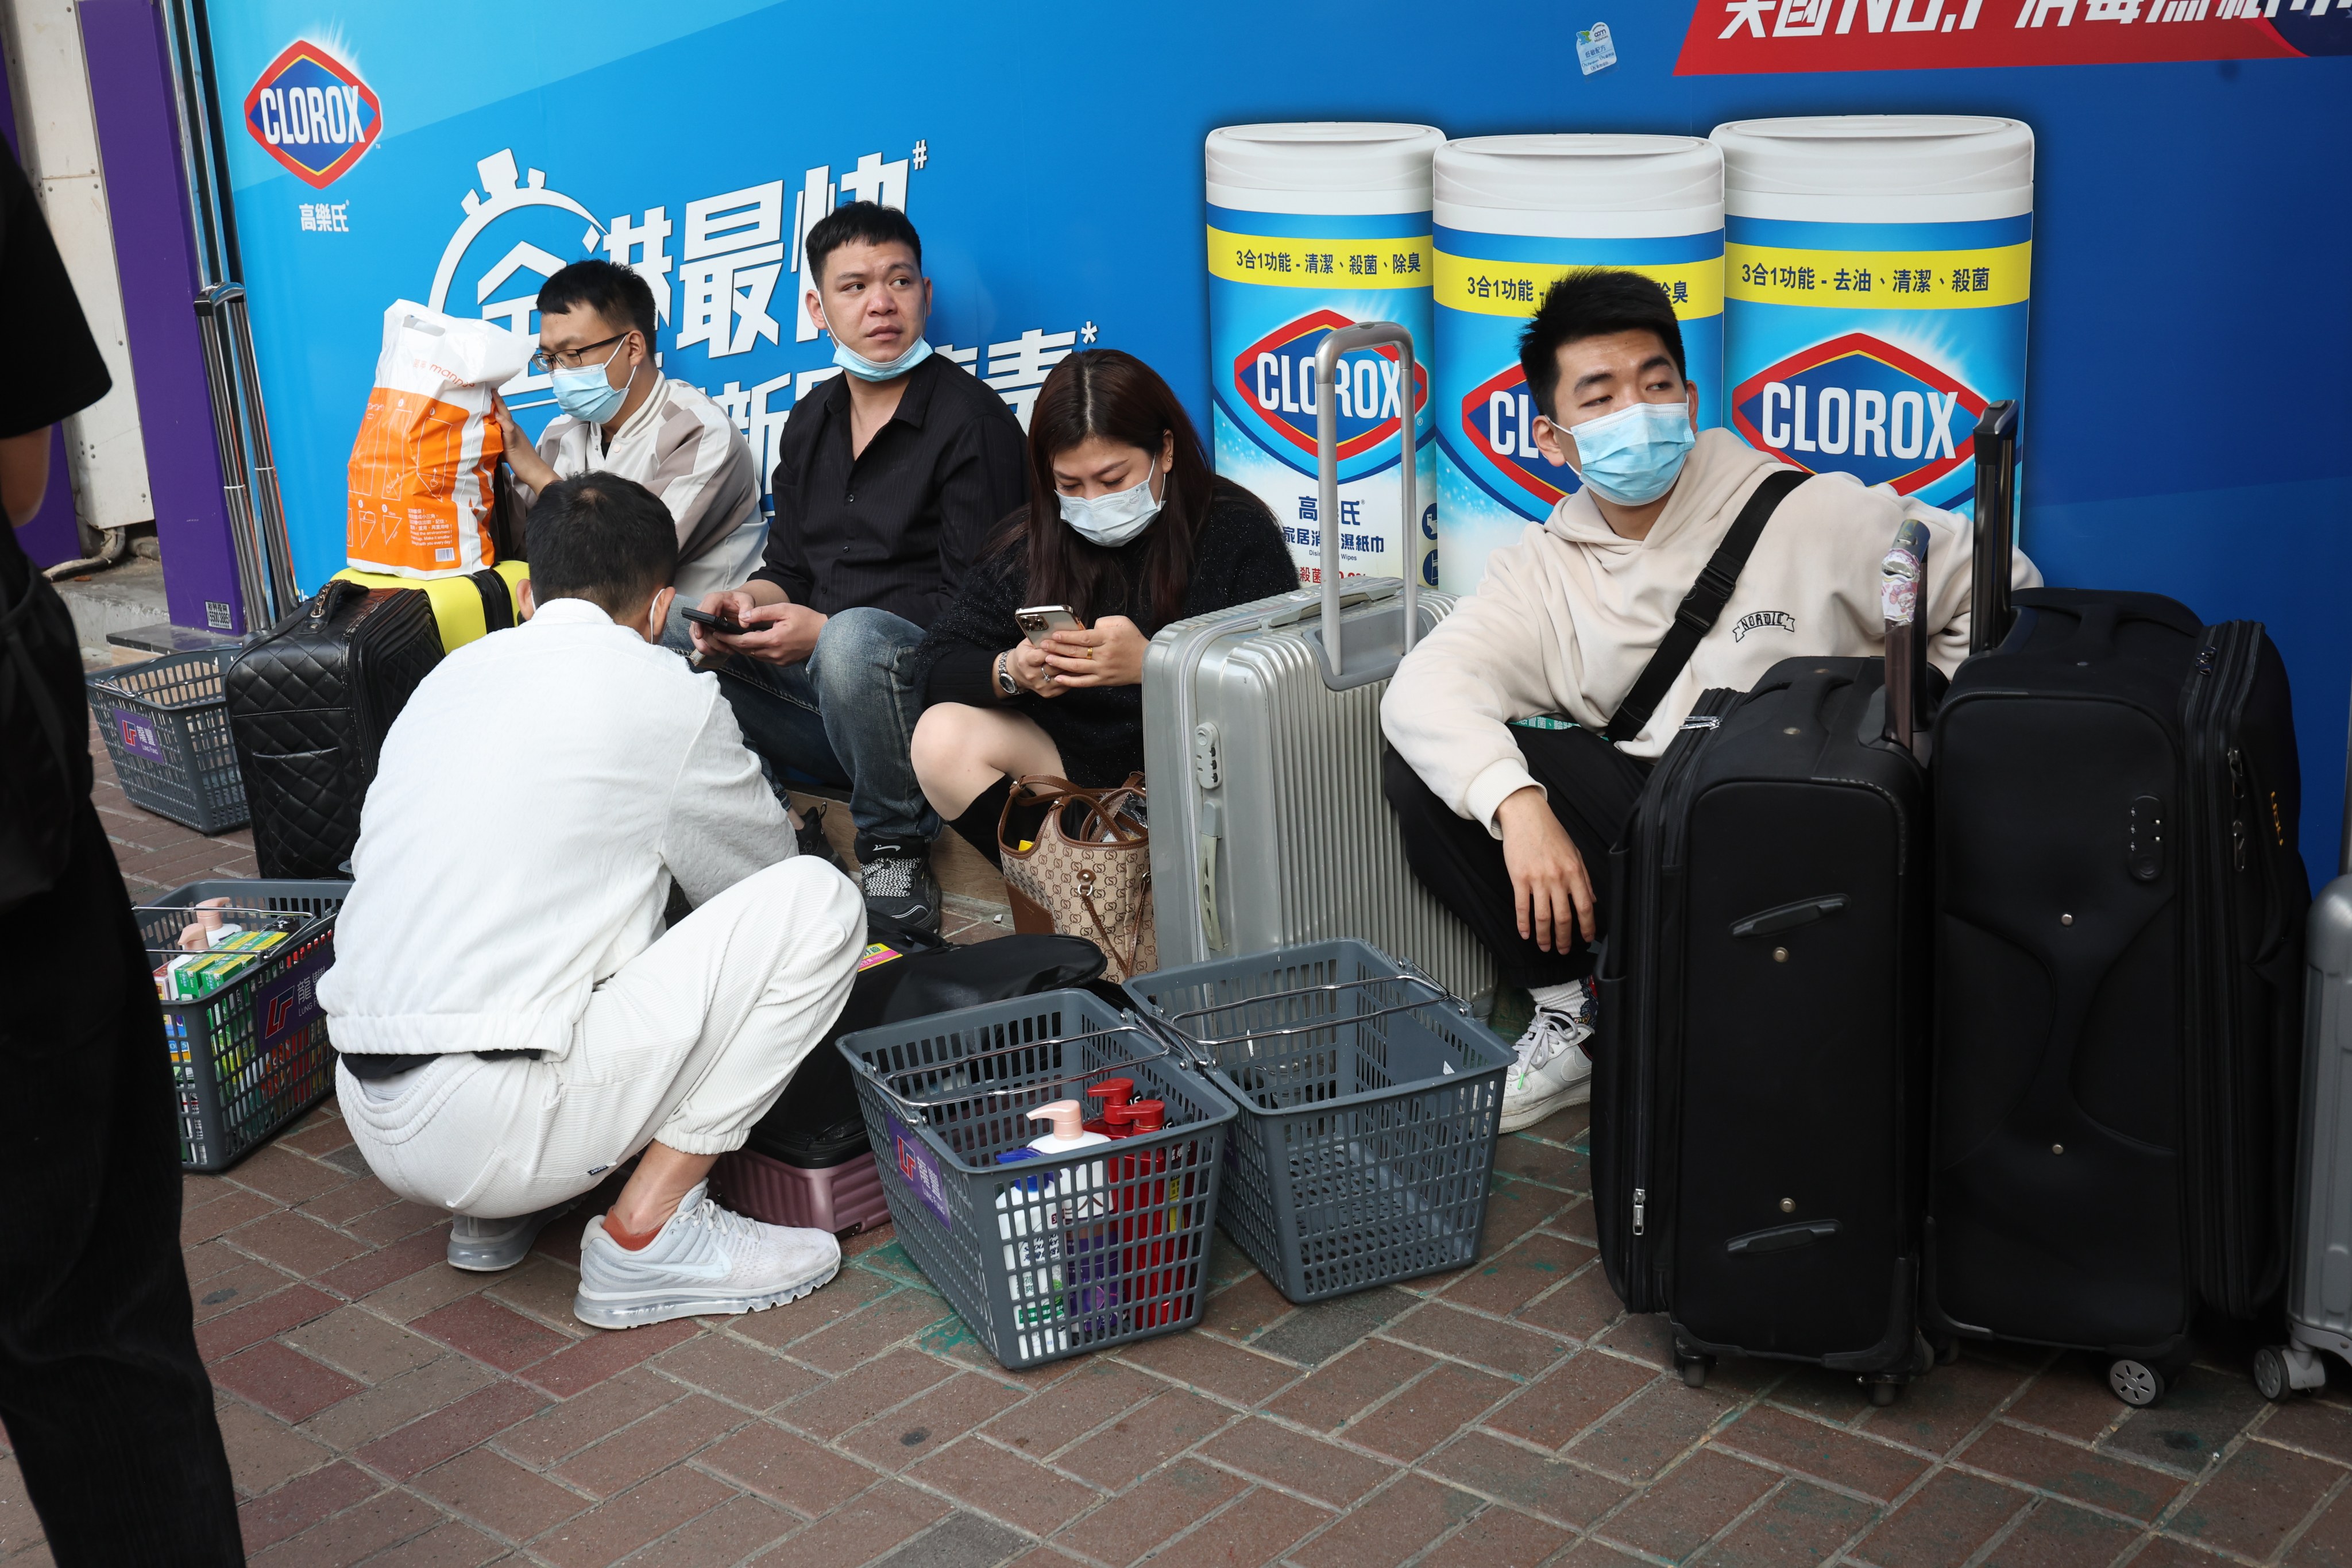 Tourists and parallel goods traders in the city’s Sheung Shui area. Photo: Edmond So